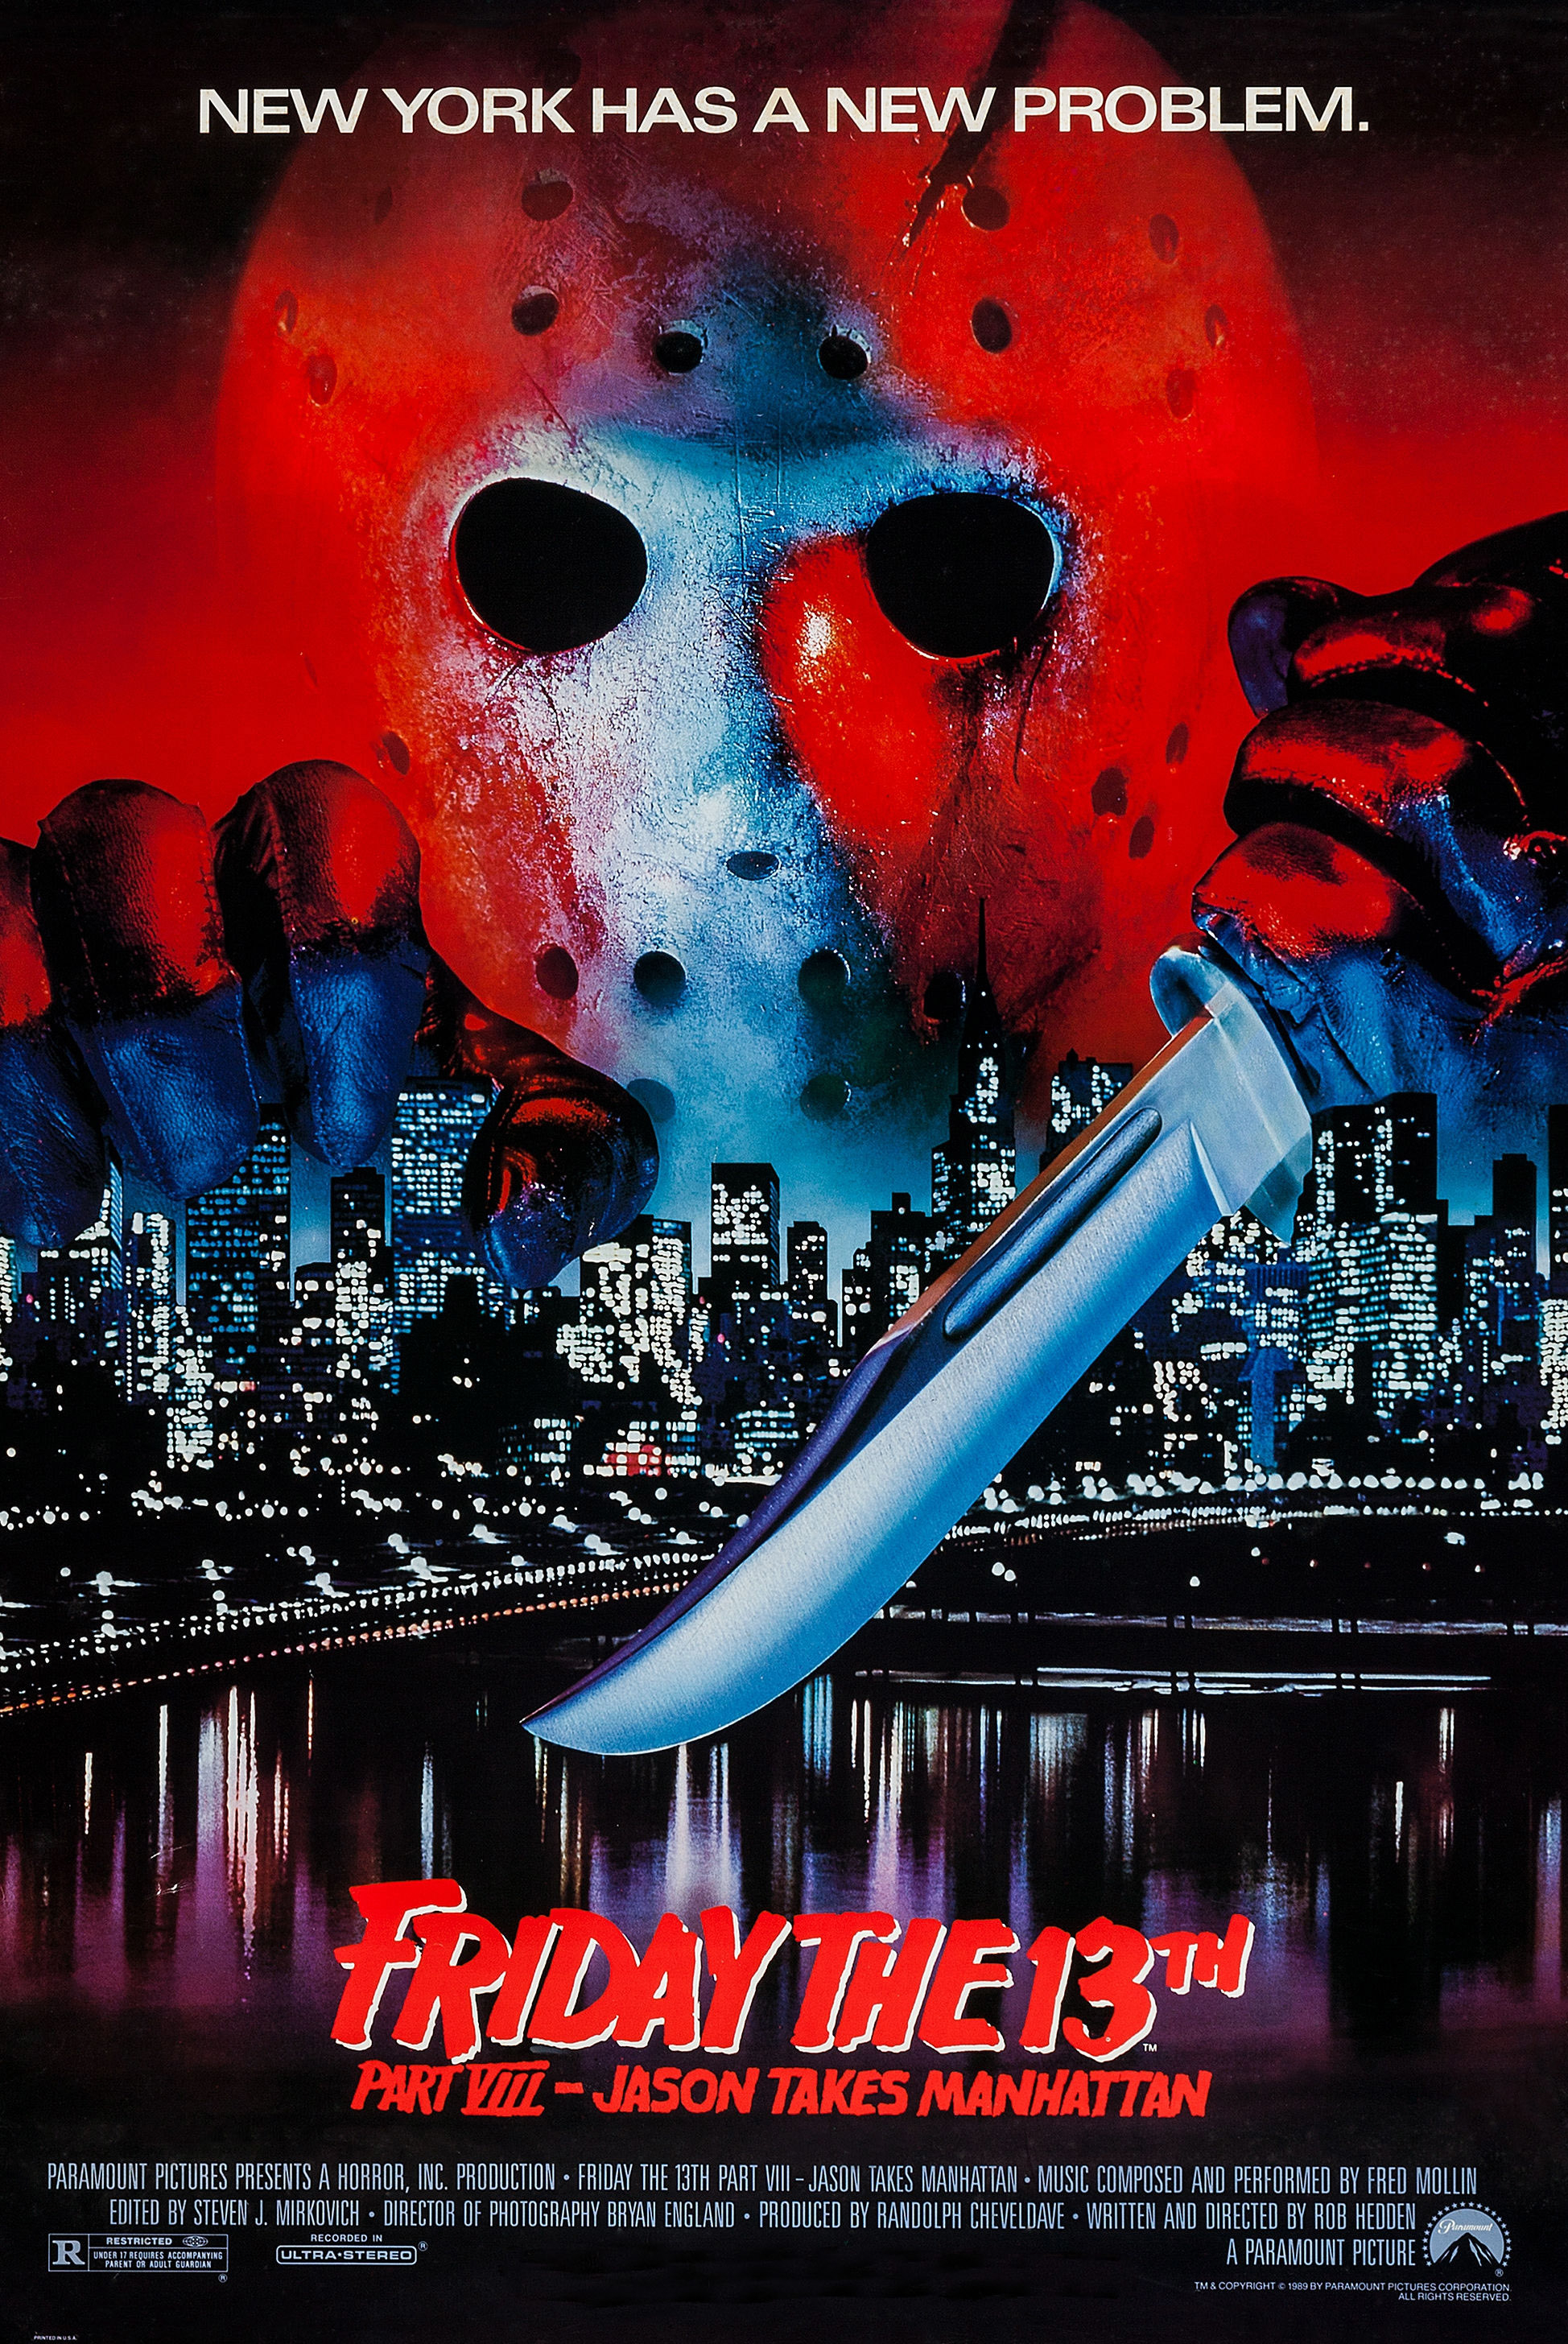 Poster for &quot;Friday the 13th Part VIII - Jason Takes Manhattan&quot;